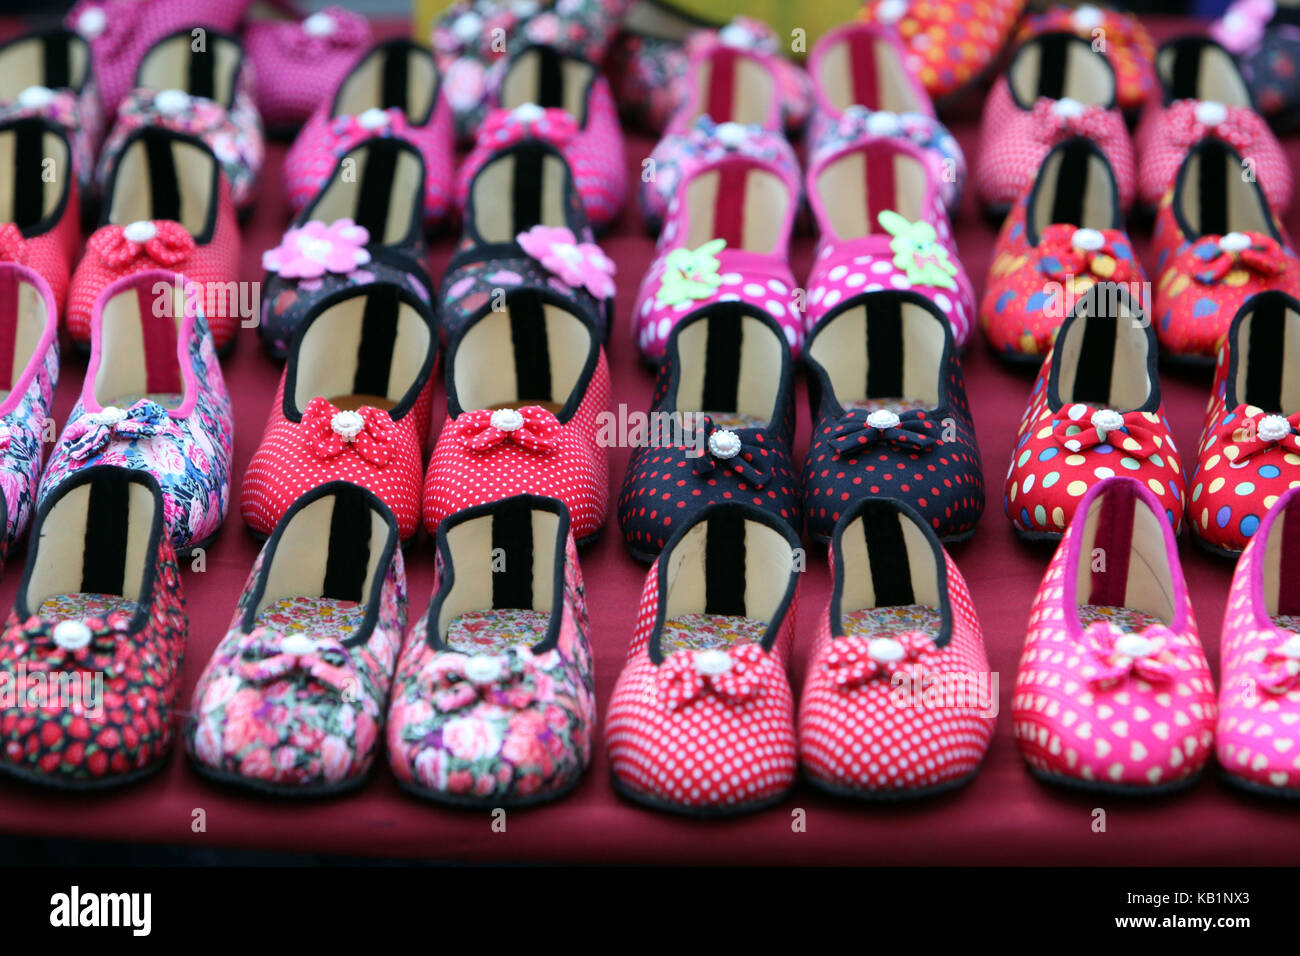 Asia, South-East Asia, Thailand, Yasothon, market, shoes, pink, Stock Photo